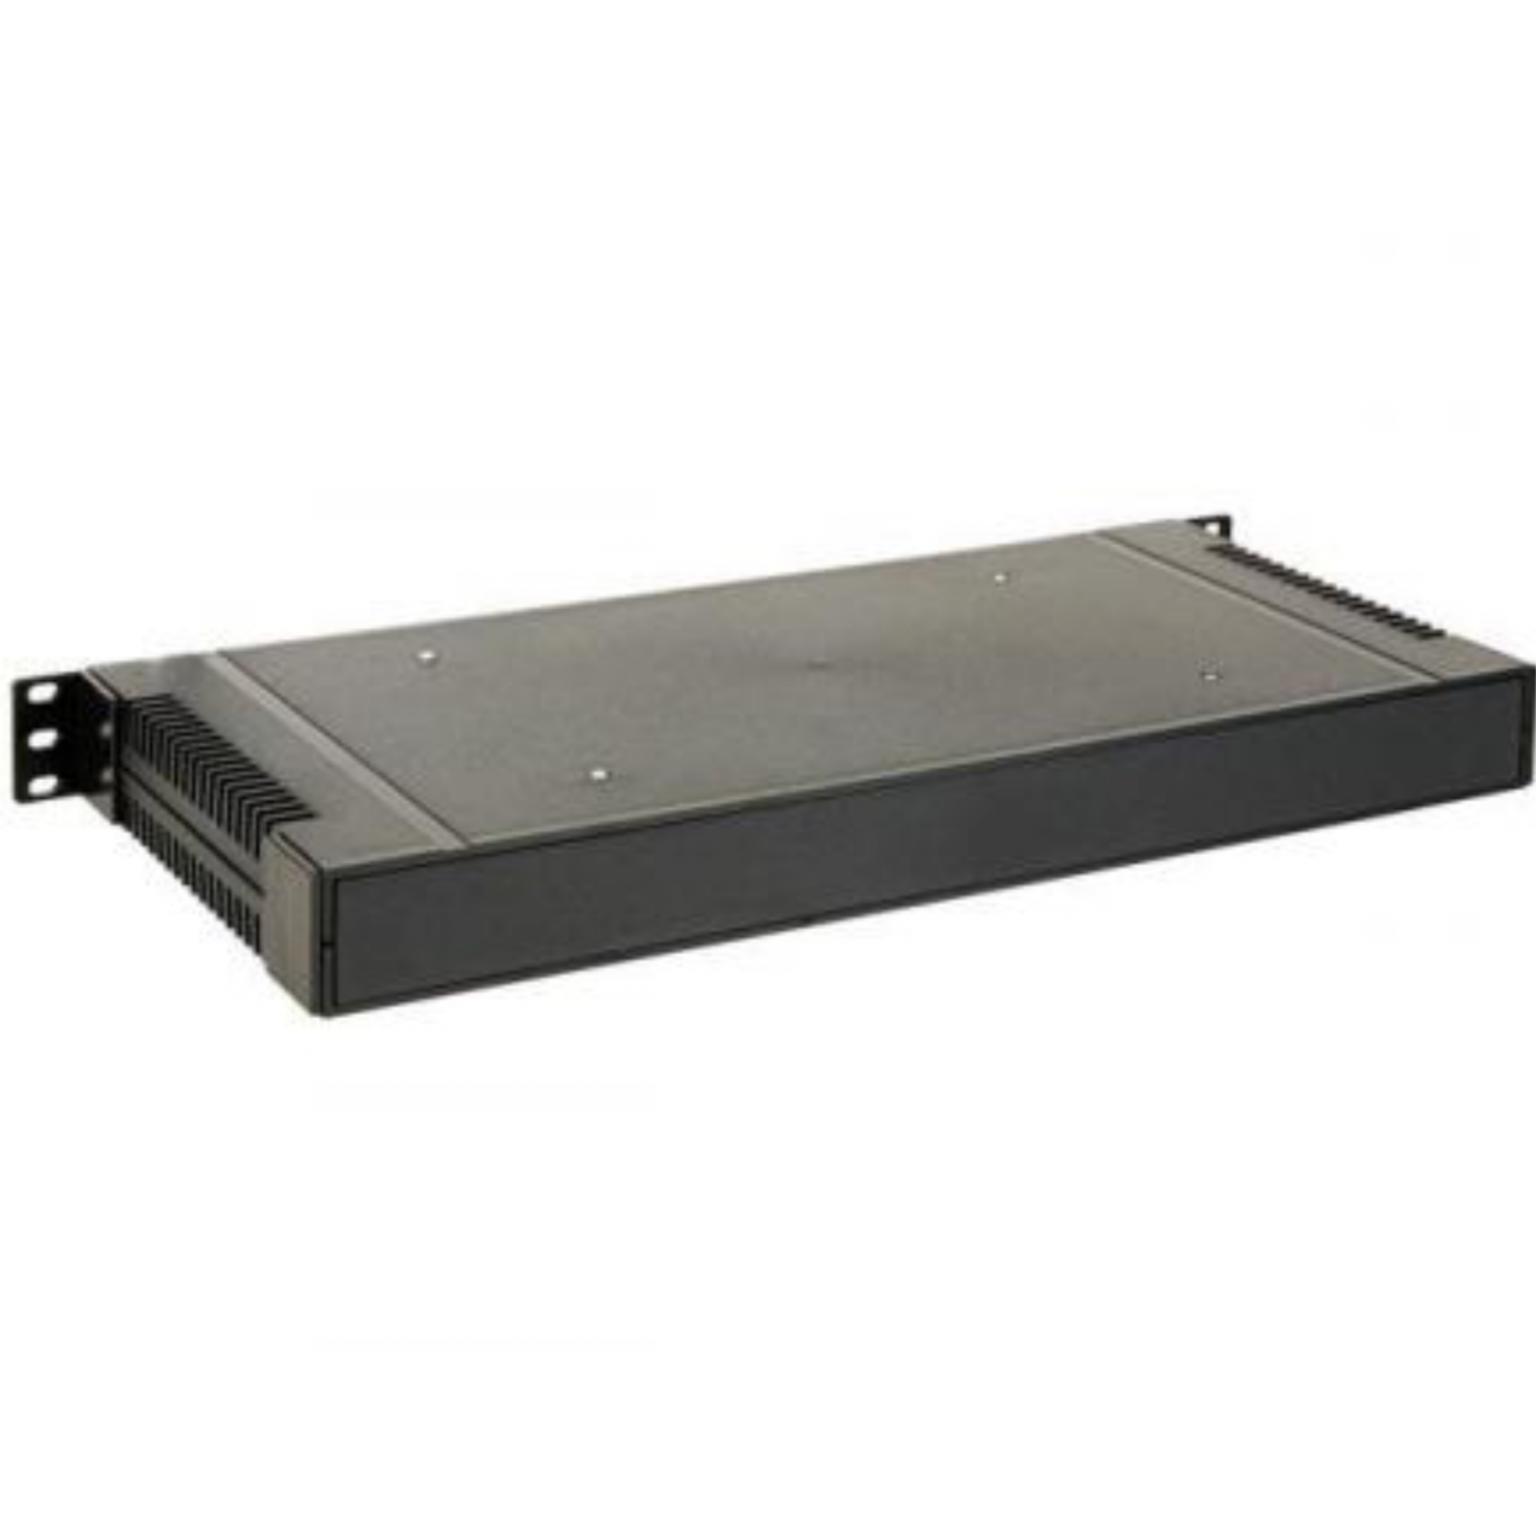 Image of 19 BEHUIZING IN ABS VOOR RACKMONTAGE - 1U - HQ Products